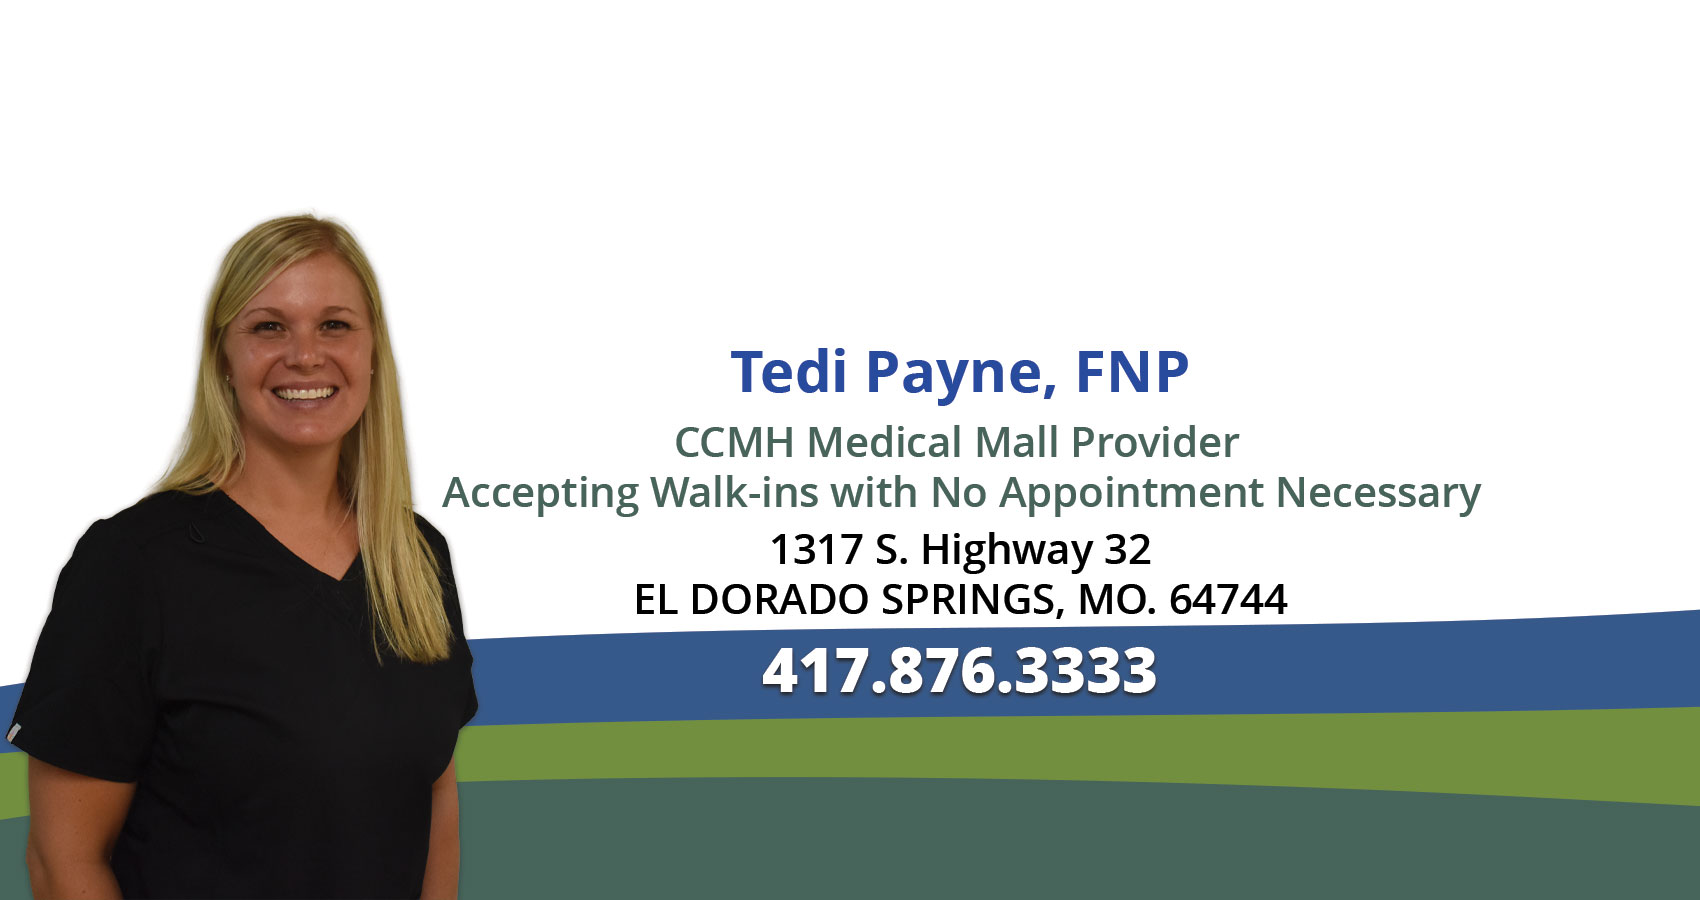 Tedi Payne, FNP
CCMH Medical Mall Provider
Accepting Walk-Ins with No Appointment Necessary
1317 S. Highway 32
EL DORADO SPRINGS, MO. 64744
417.876.3333